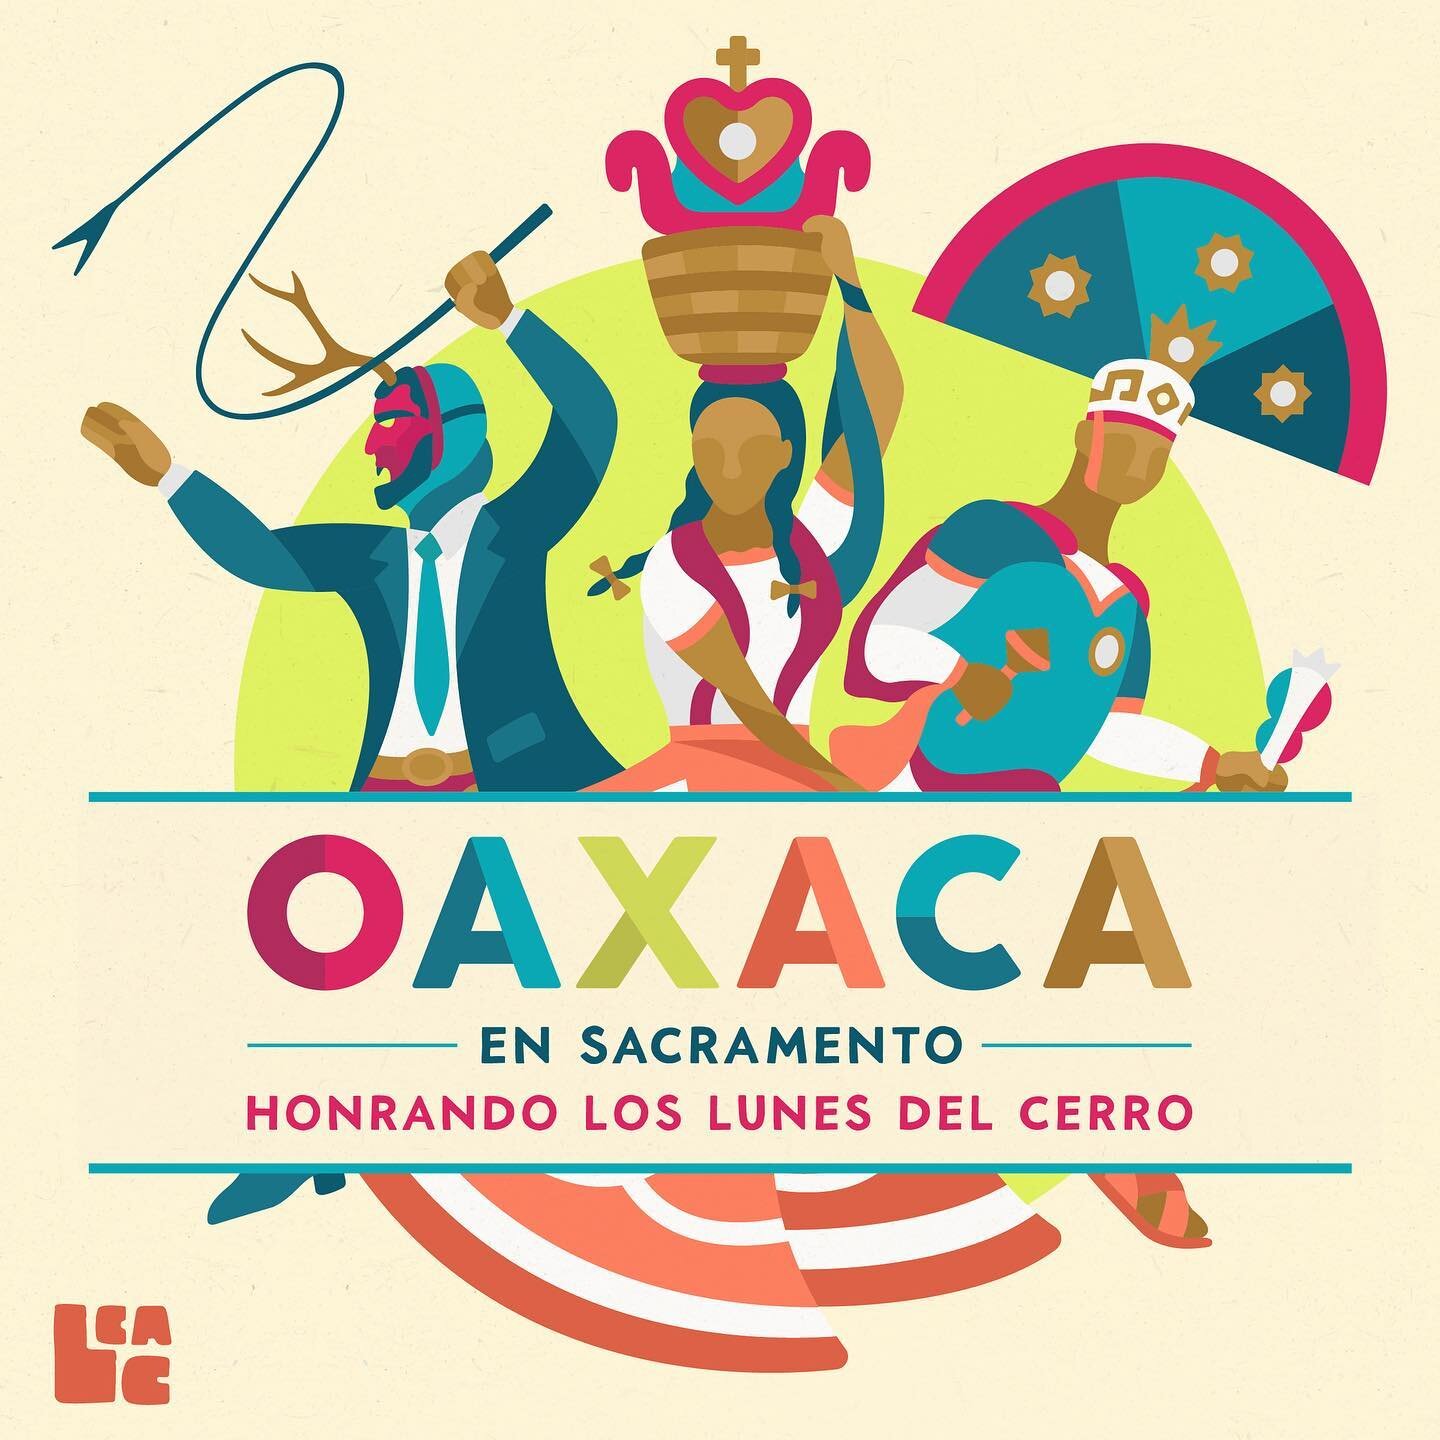 Art and graphic design for Sacramento en Oaxaca, Honrando Los Lunes del Cerro, which took place Sunday August 14th 2022 in Sacramento. Presented by the Latino Center for Art and Culture. @sac_lcac 

#latinoart #latinoartists #graphicdesign #microbran